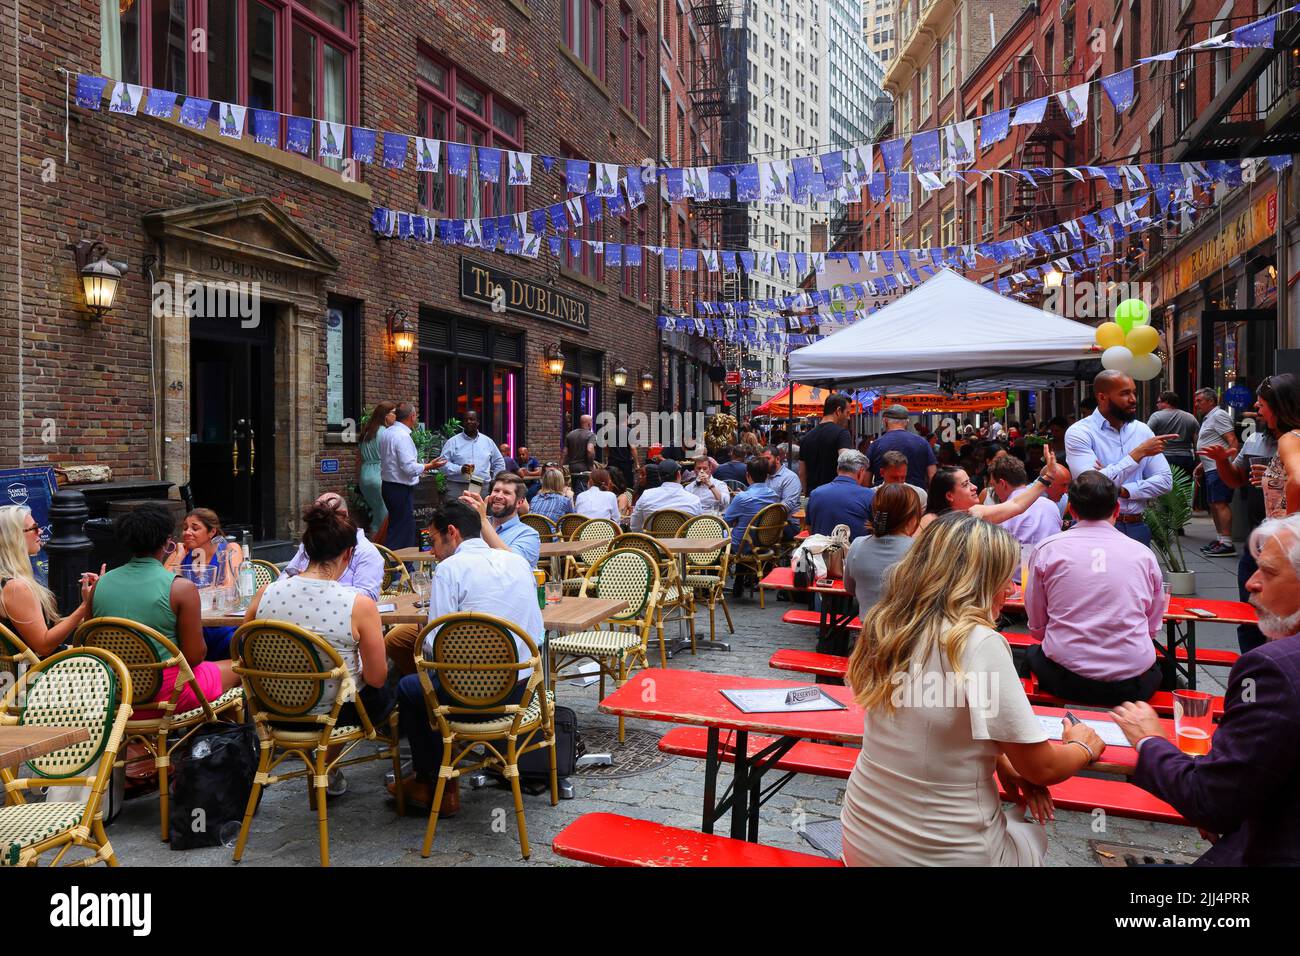 Office workers after work at Stone Street with its many restaurants, outdoor dining, and beer garden in Lower Manhattan's Financial District, New York Stock Photo